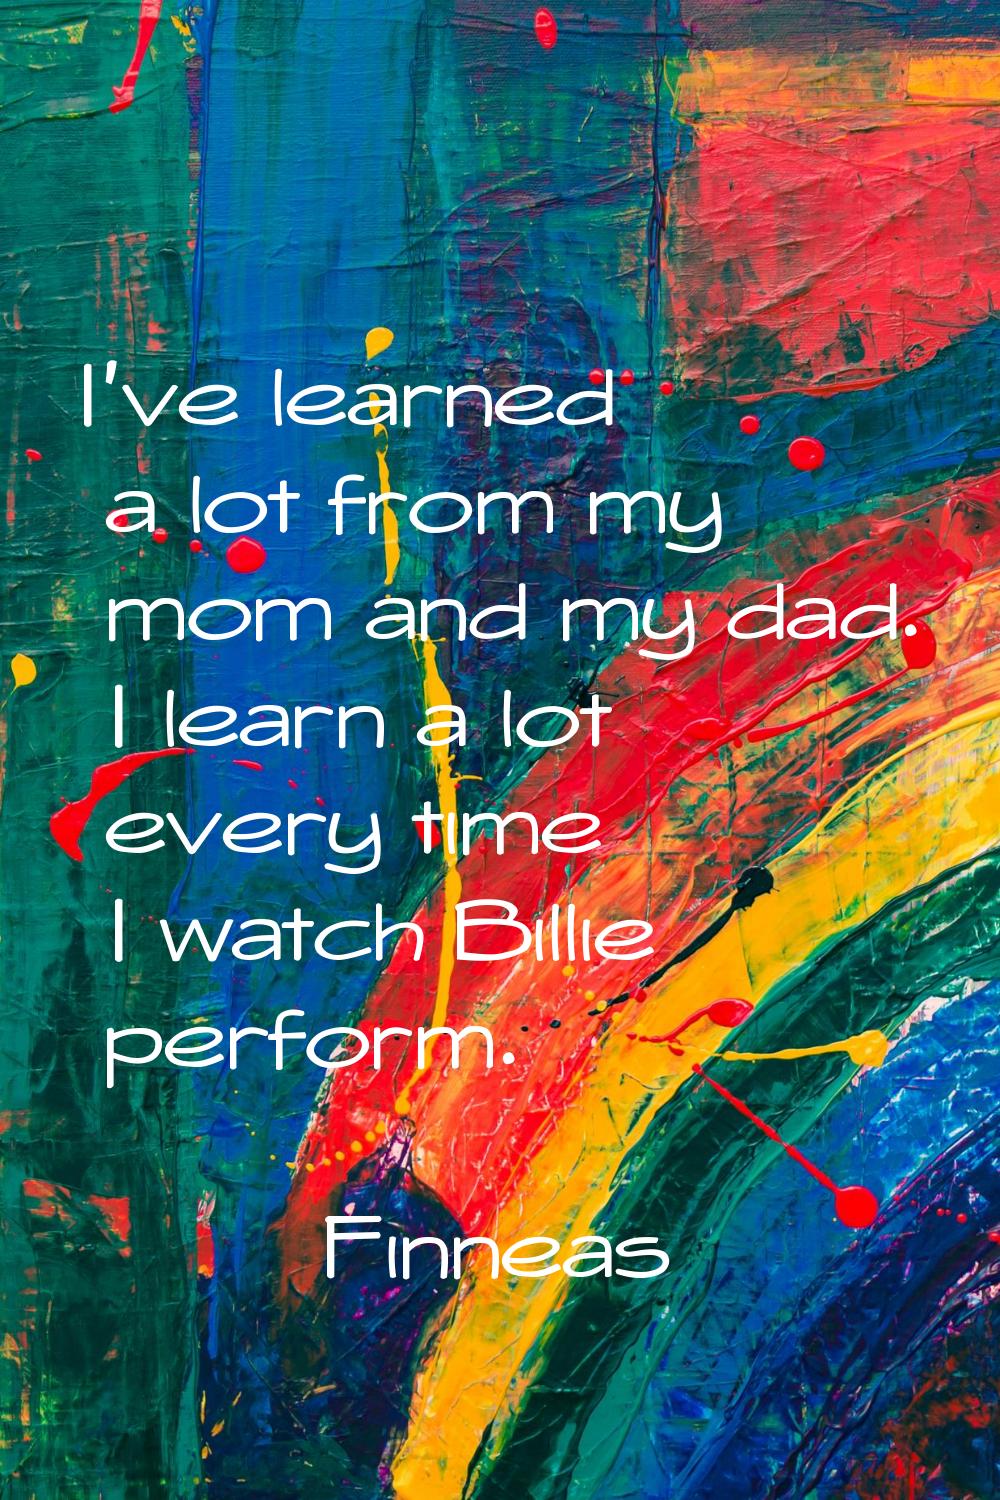 I've learned a lot from my mom and my dad. I learn a lot every time I watch Billie perform.